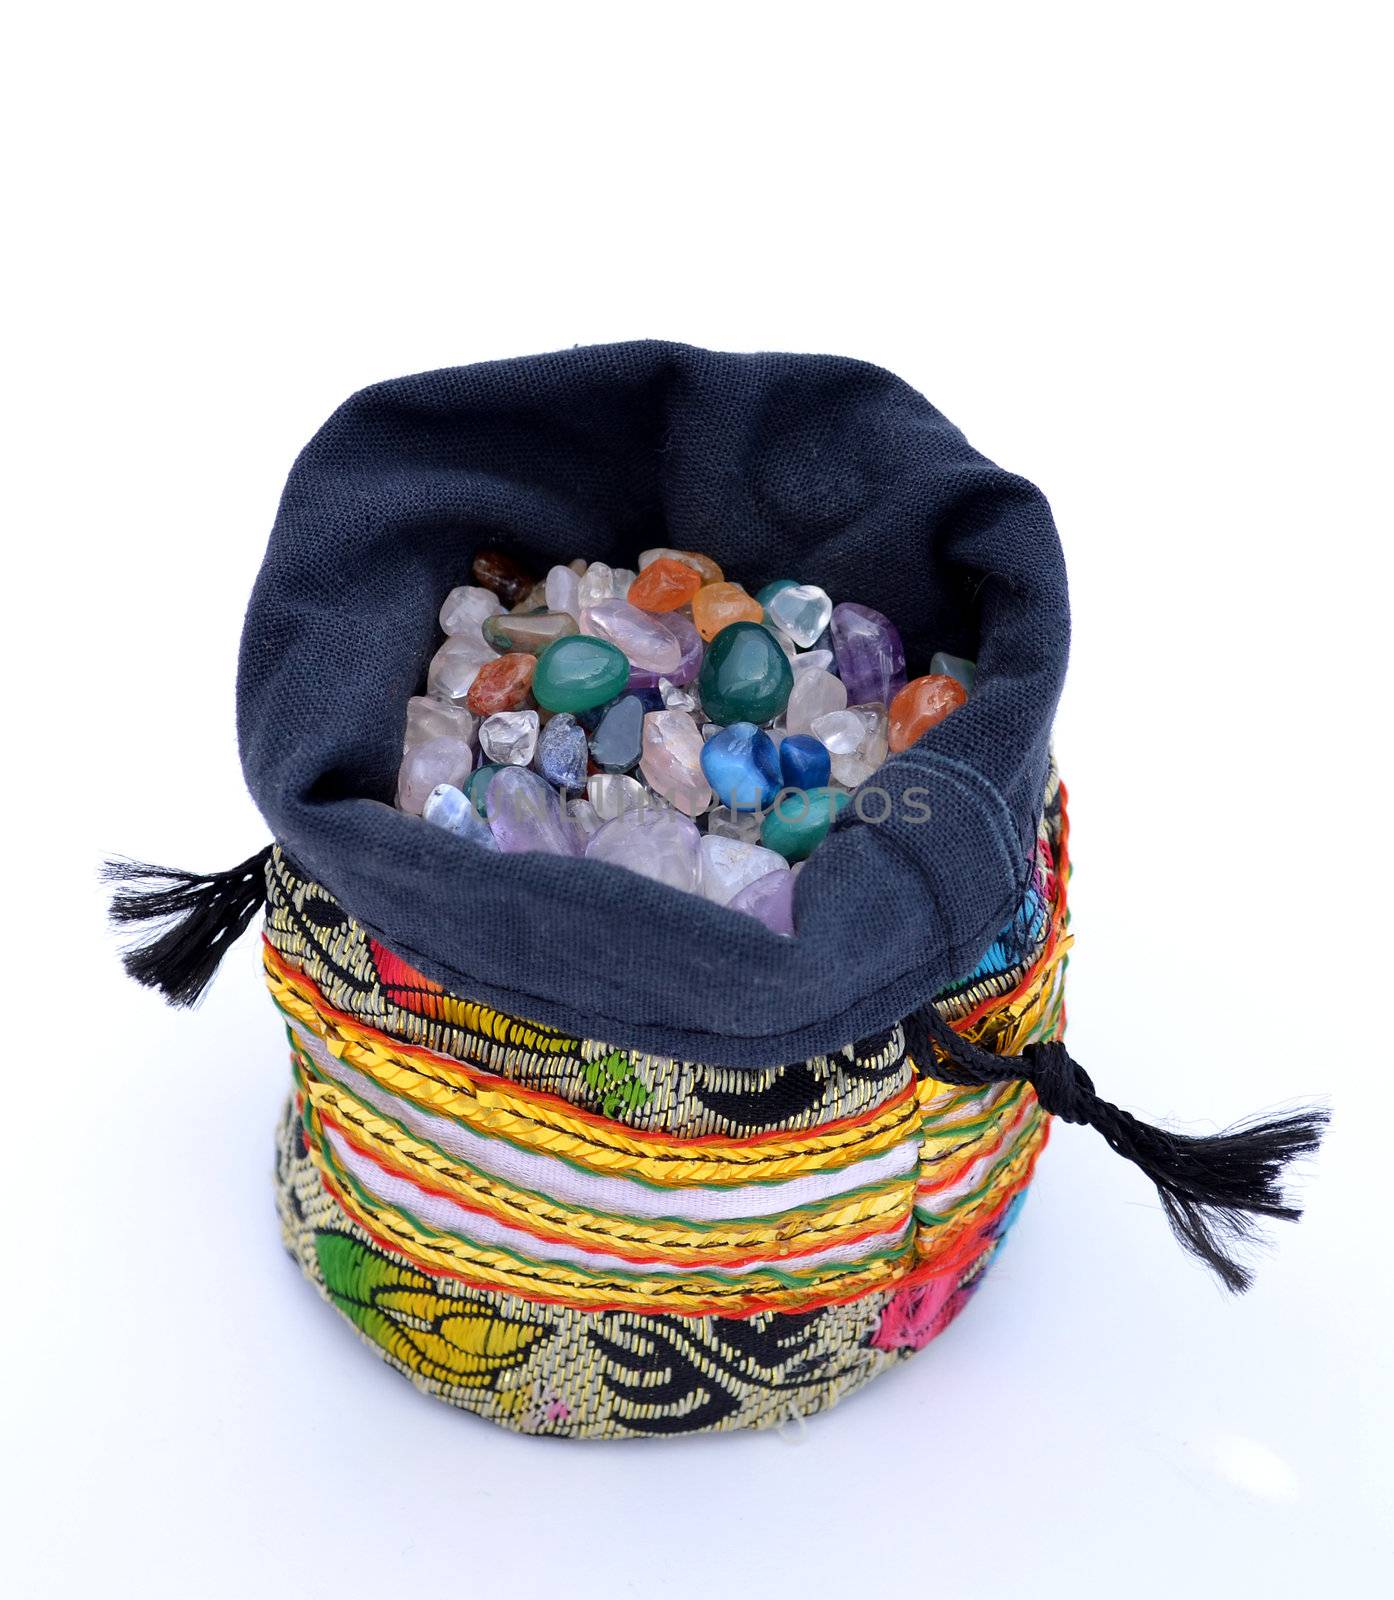 Sack of crystal beads by artofphoto